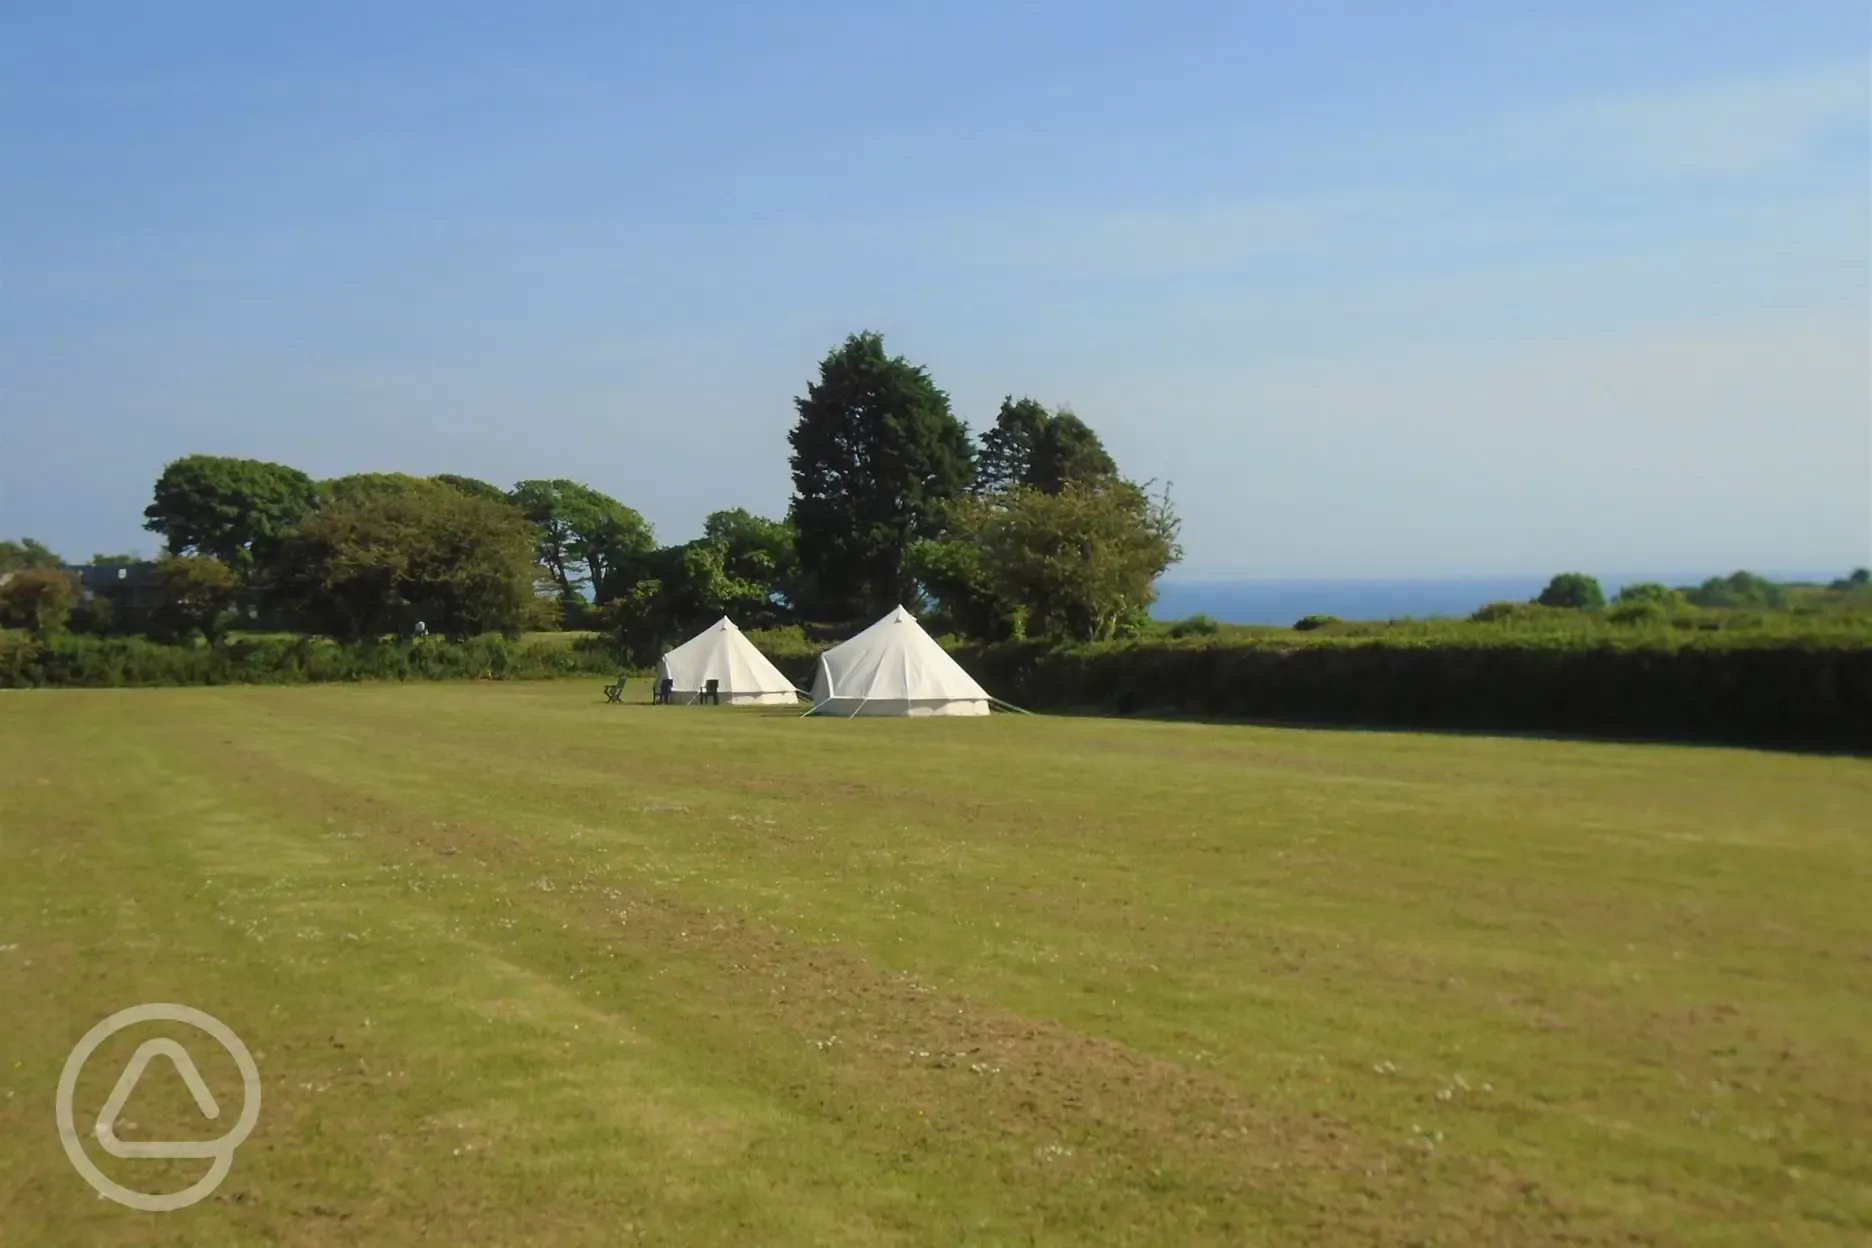 Caswell bay camping